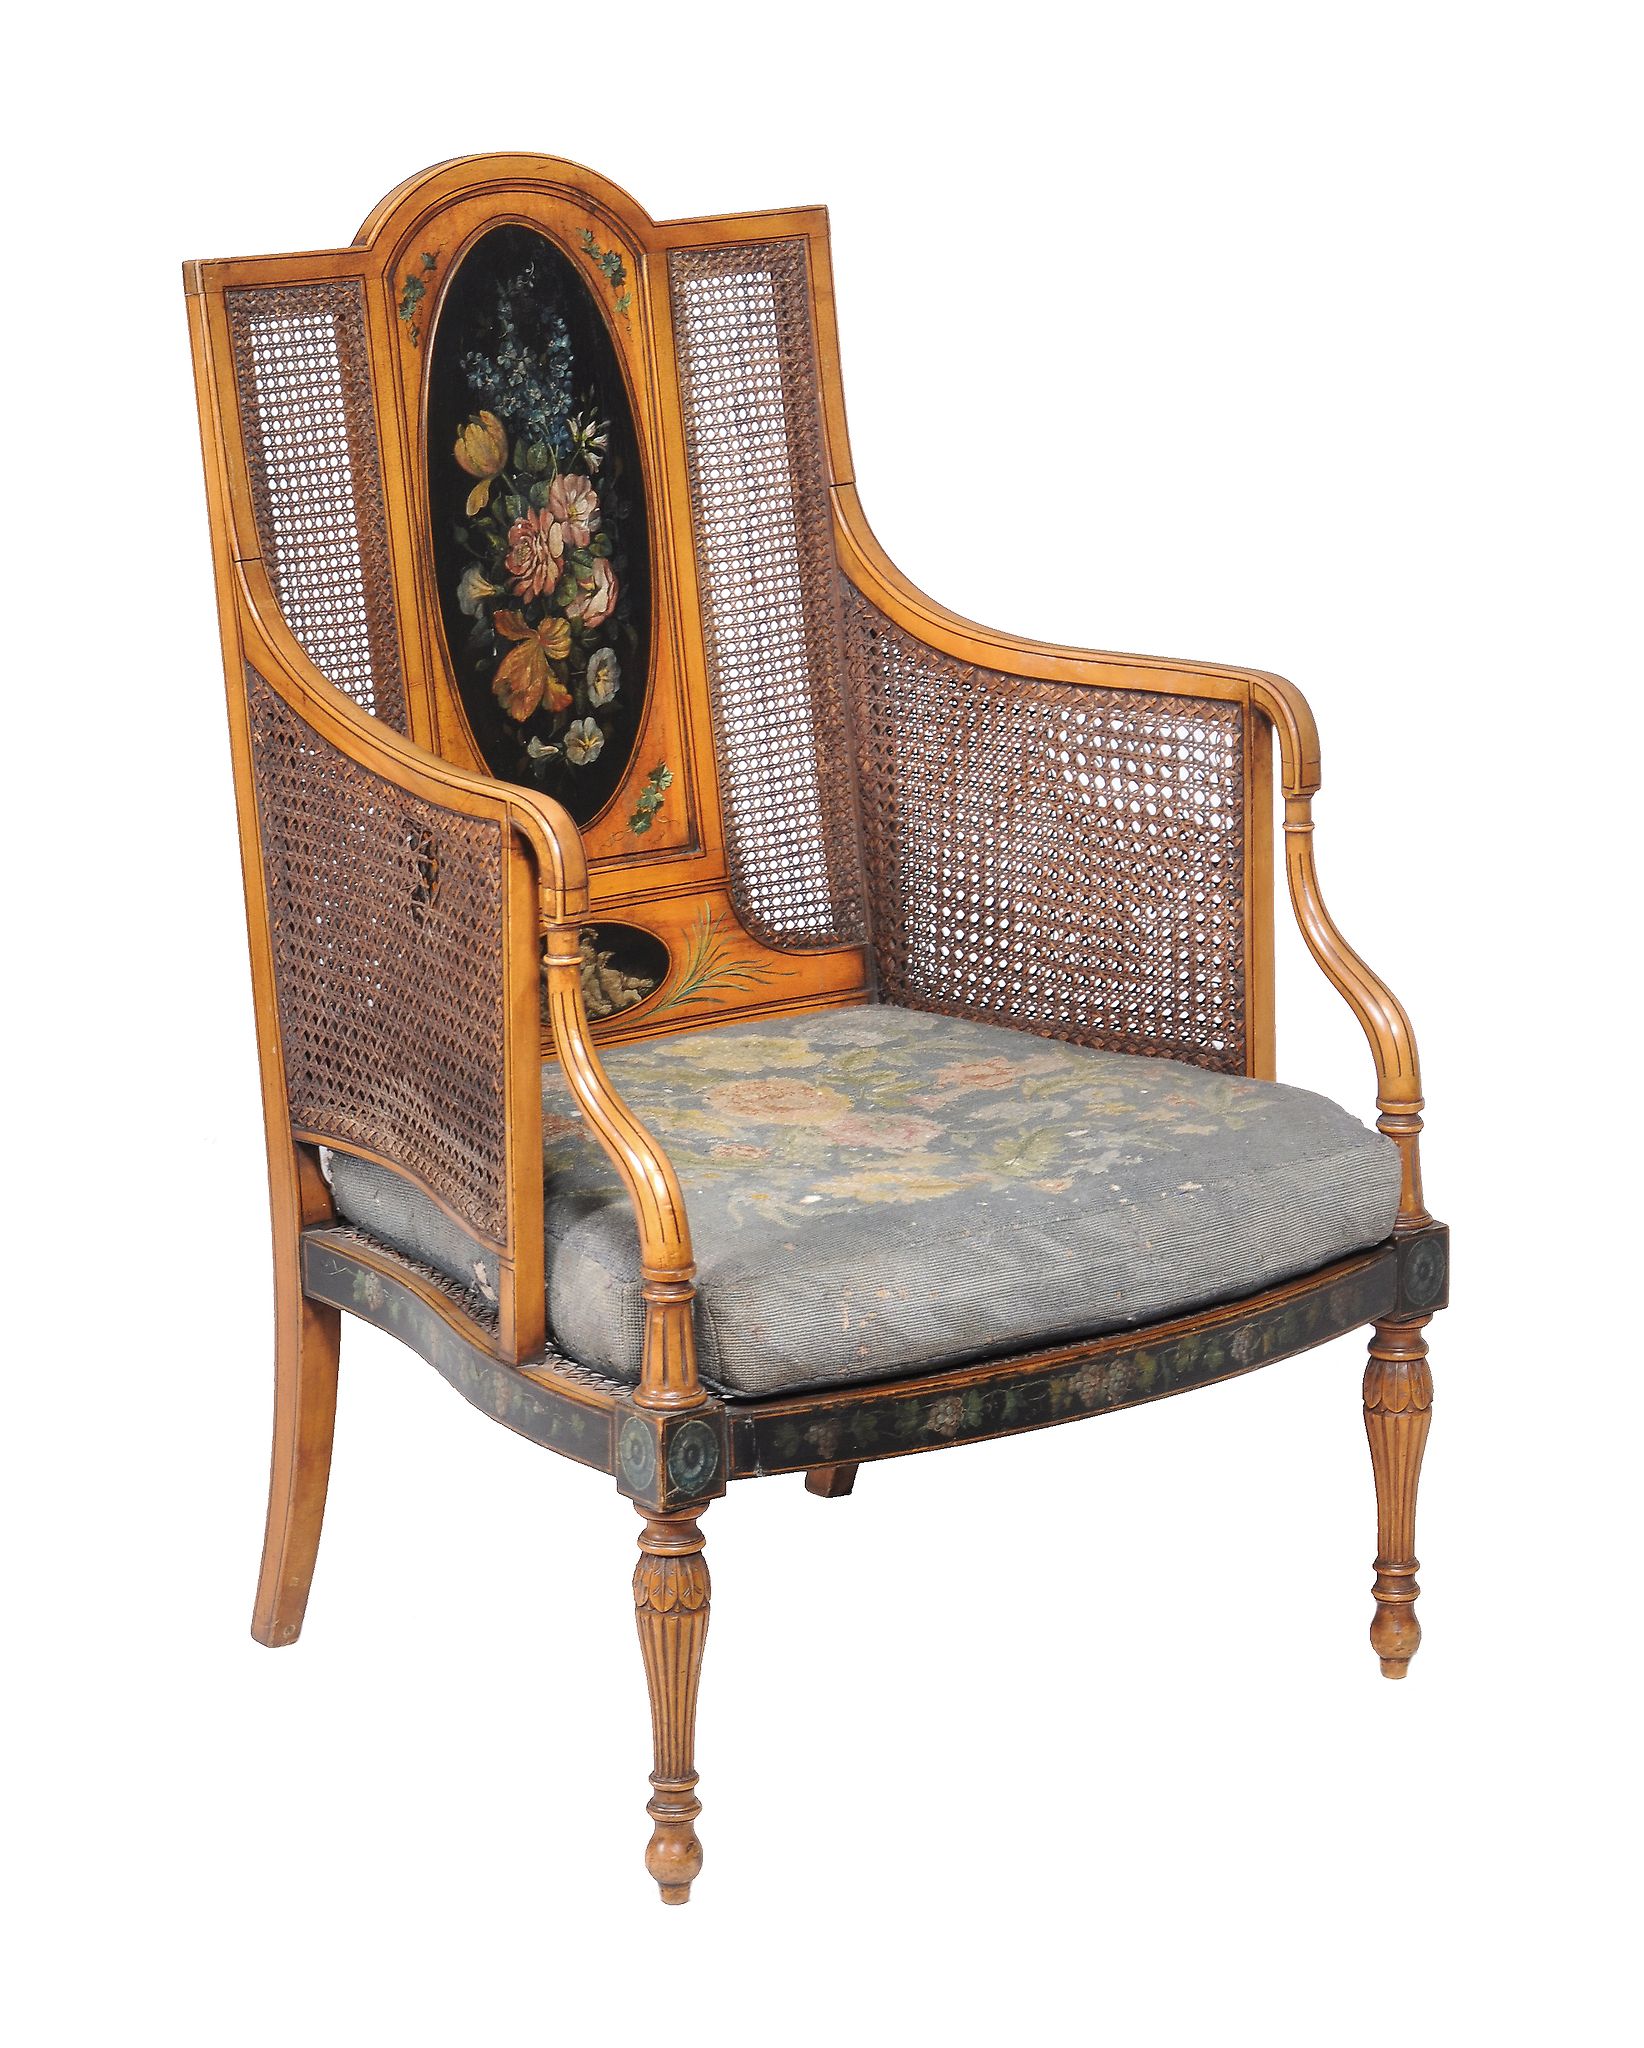 A Sheraton Revival simulated satinwood and painted bergere armchair , first quarter 20th century, - Image 3 of 3